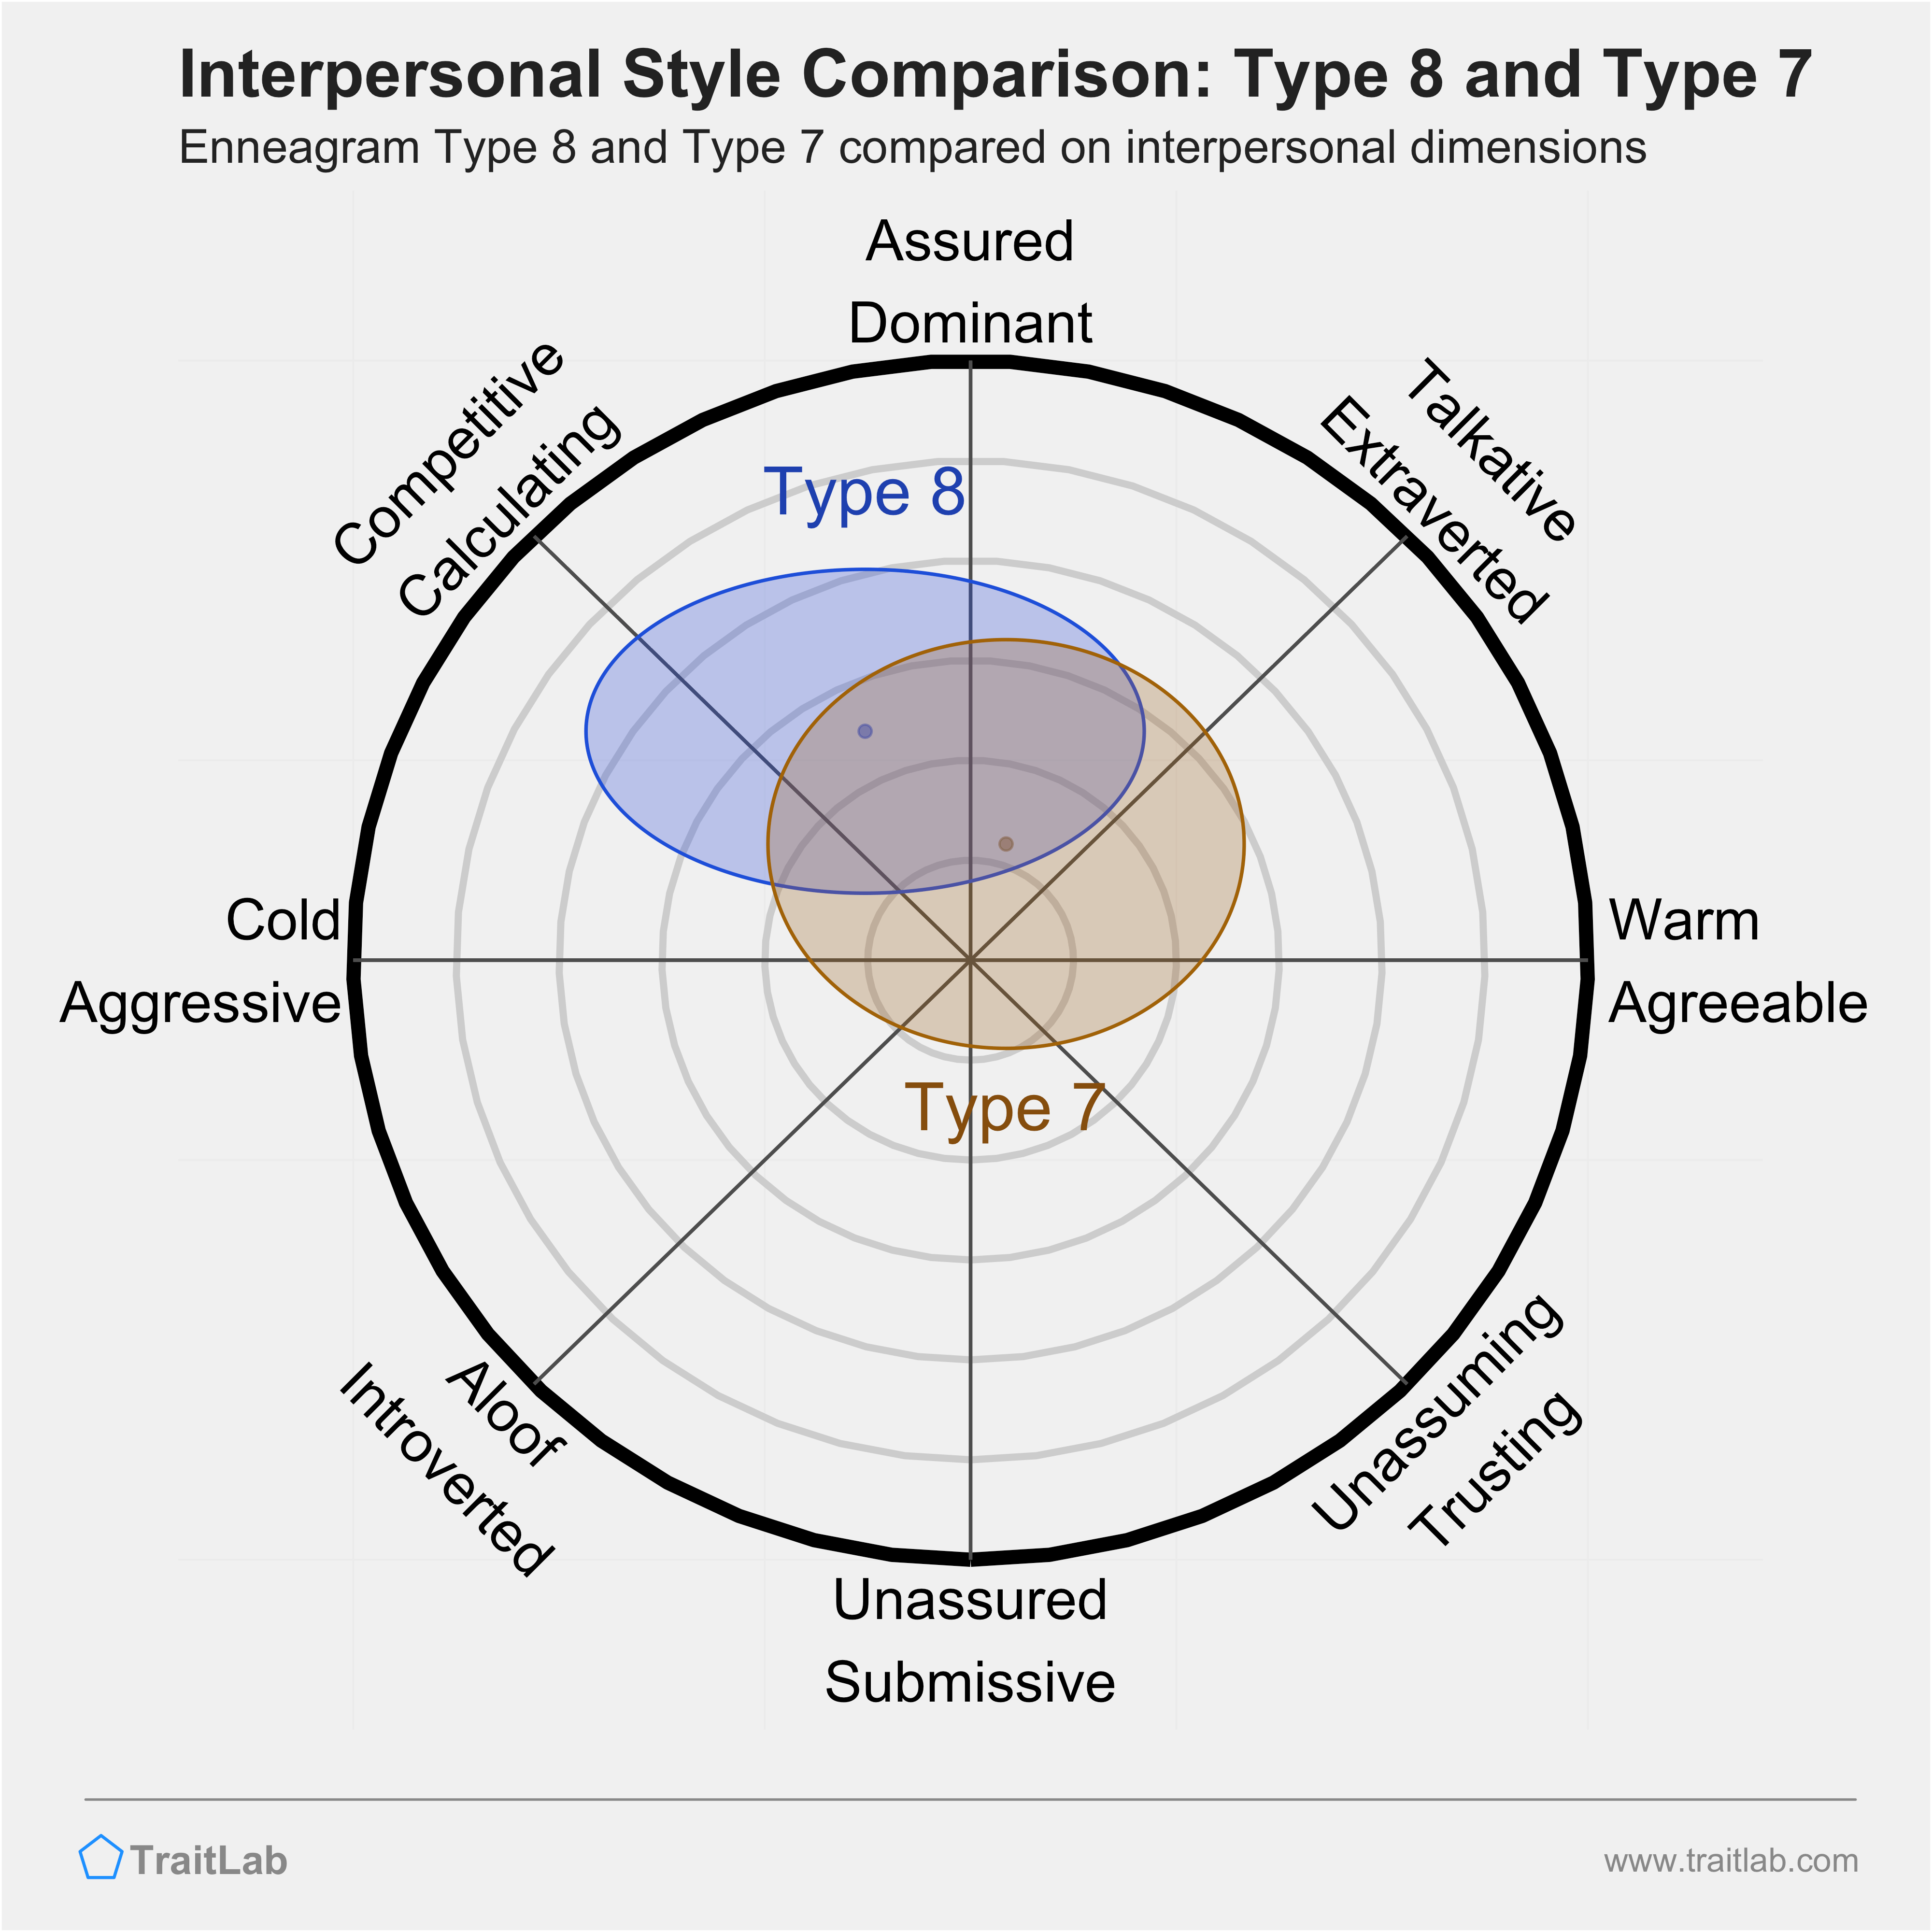 Enneagram Type 8 and Type 7 comparison across interpersonal dimensions